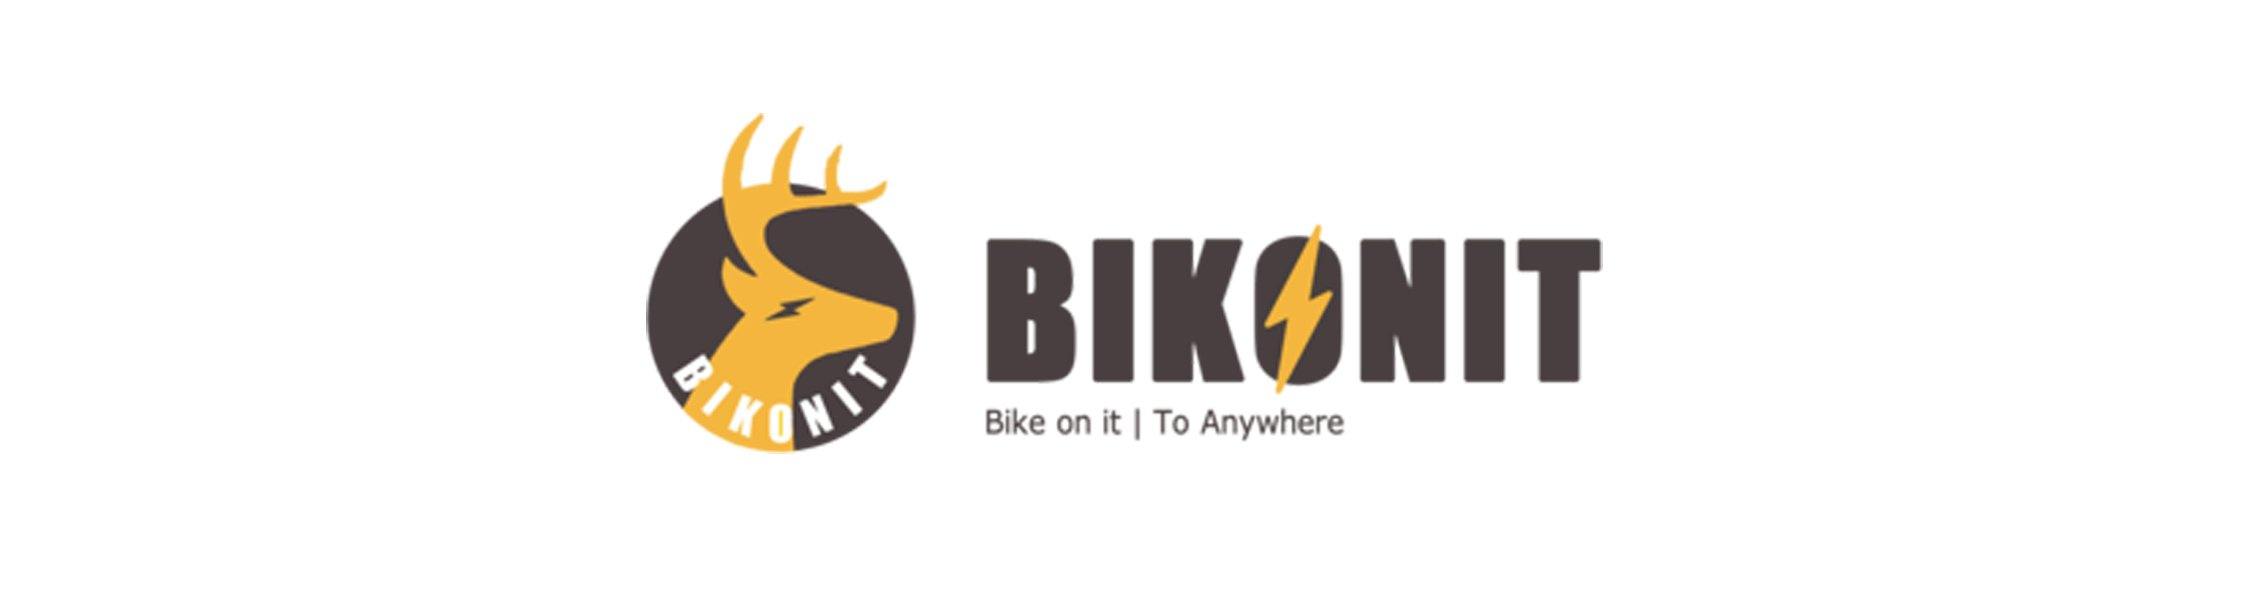 Bikonit Bikes - Recreation Outfitters